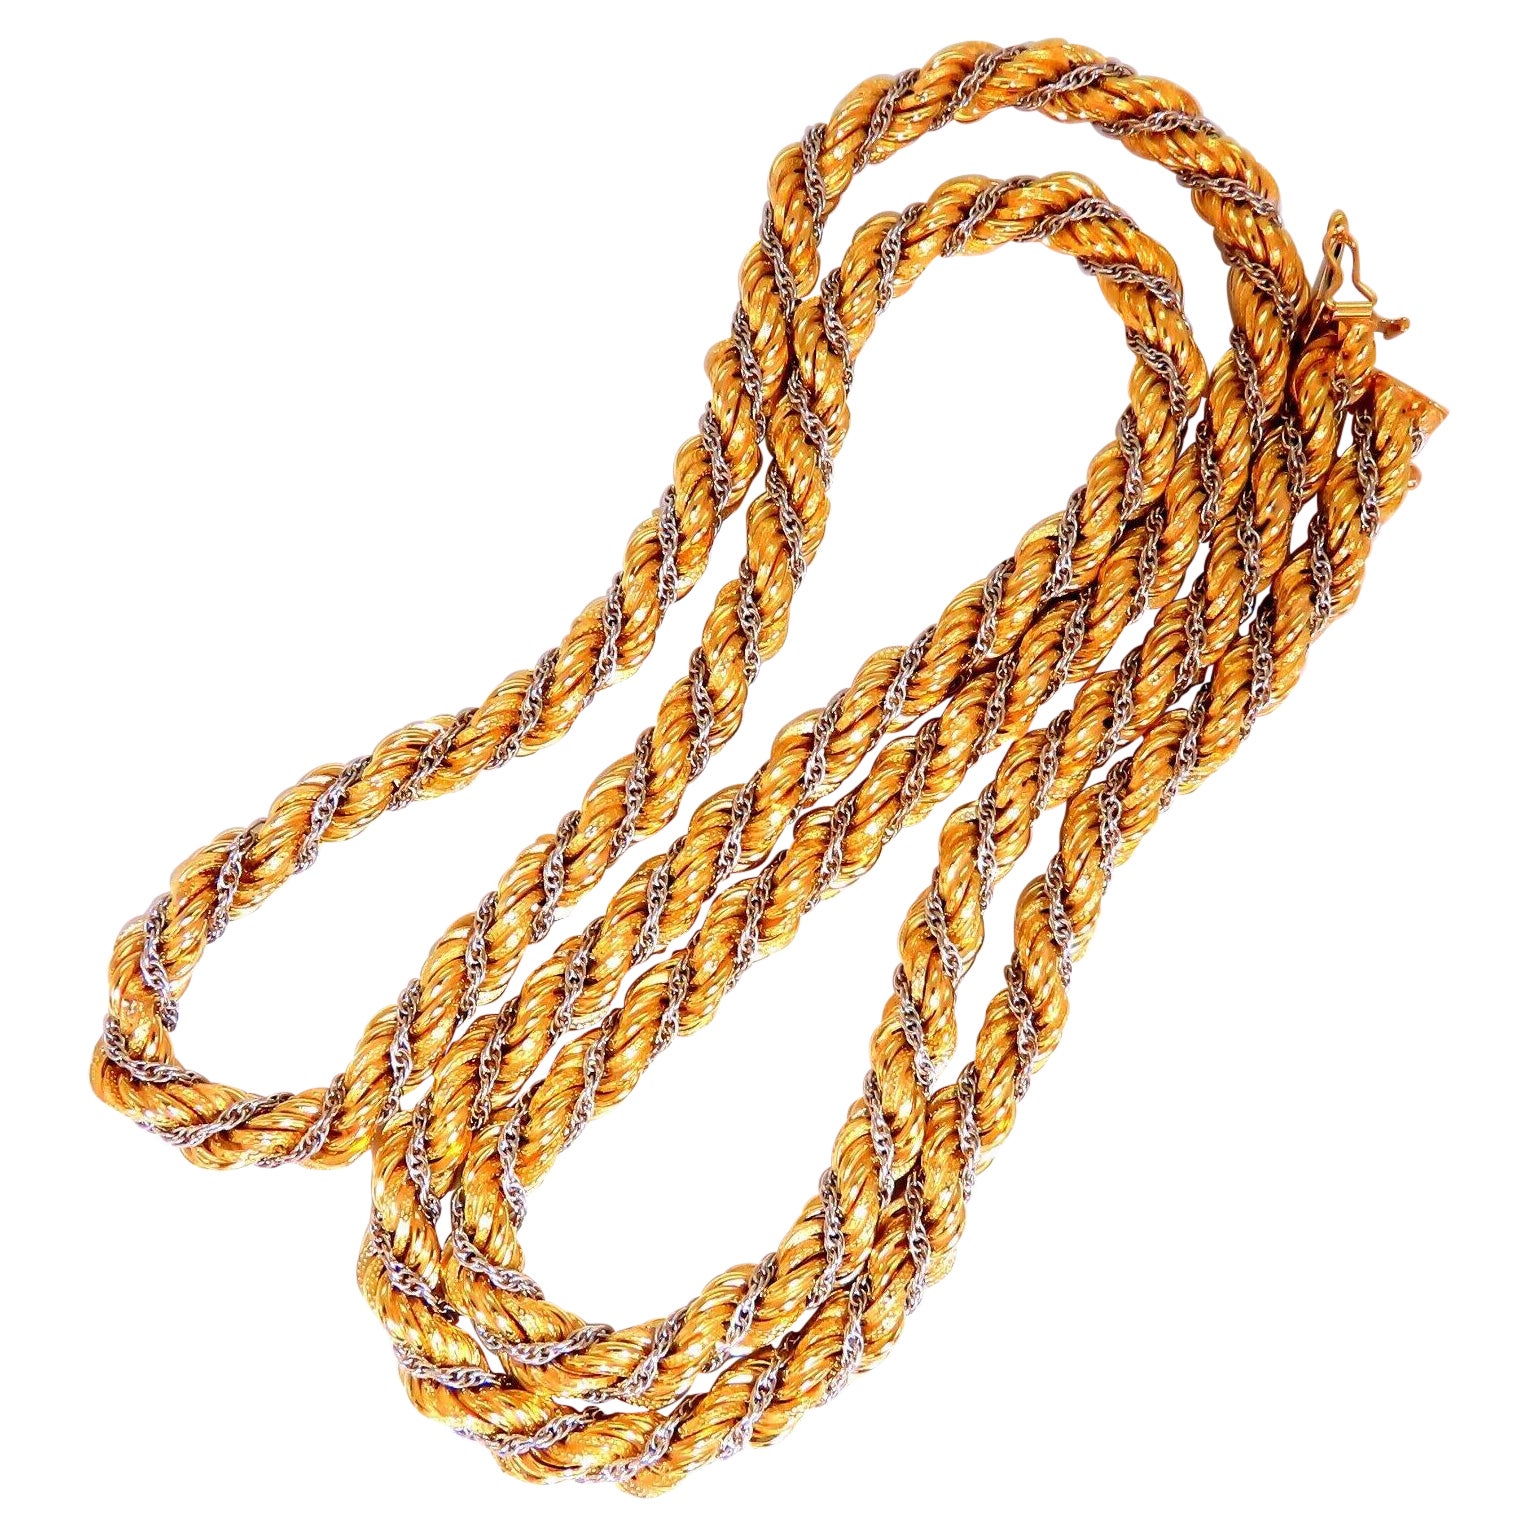 Rope Chain Necklace 14kt 63 Grams